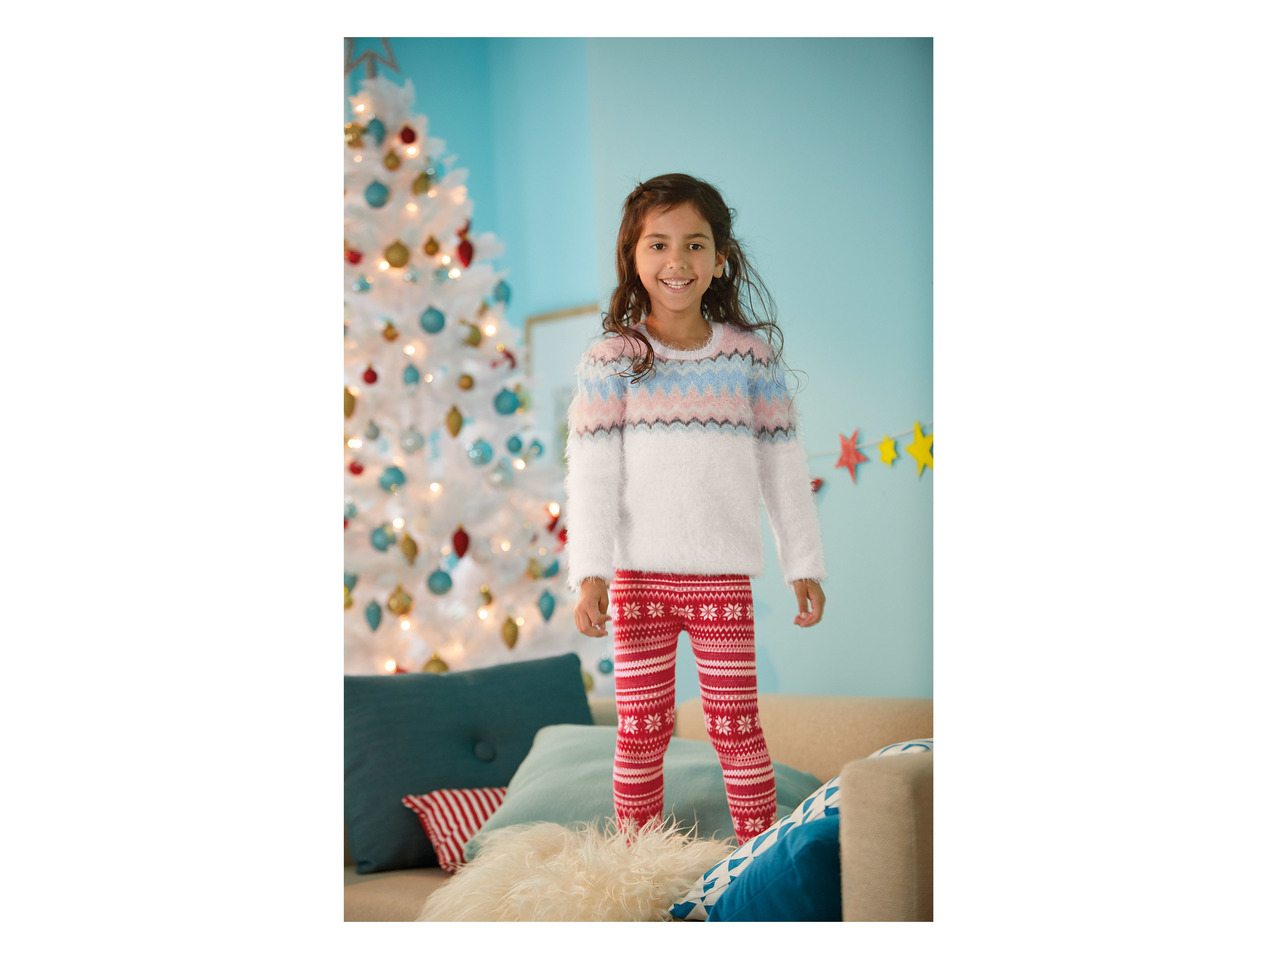 Lupilu Infants' Christmas Trousers1